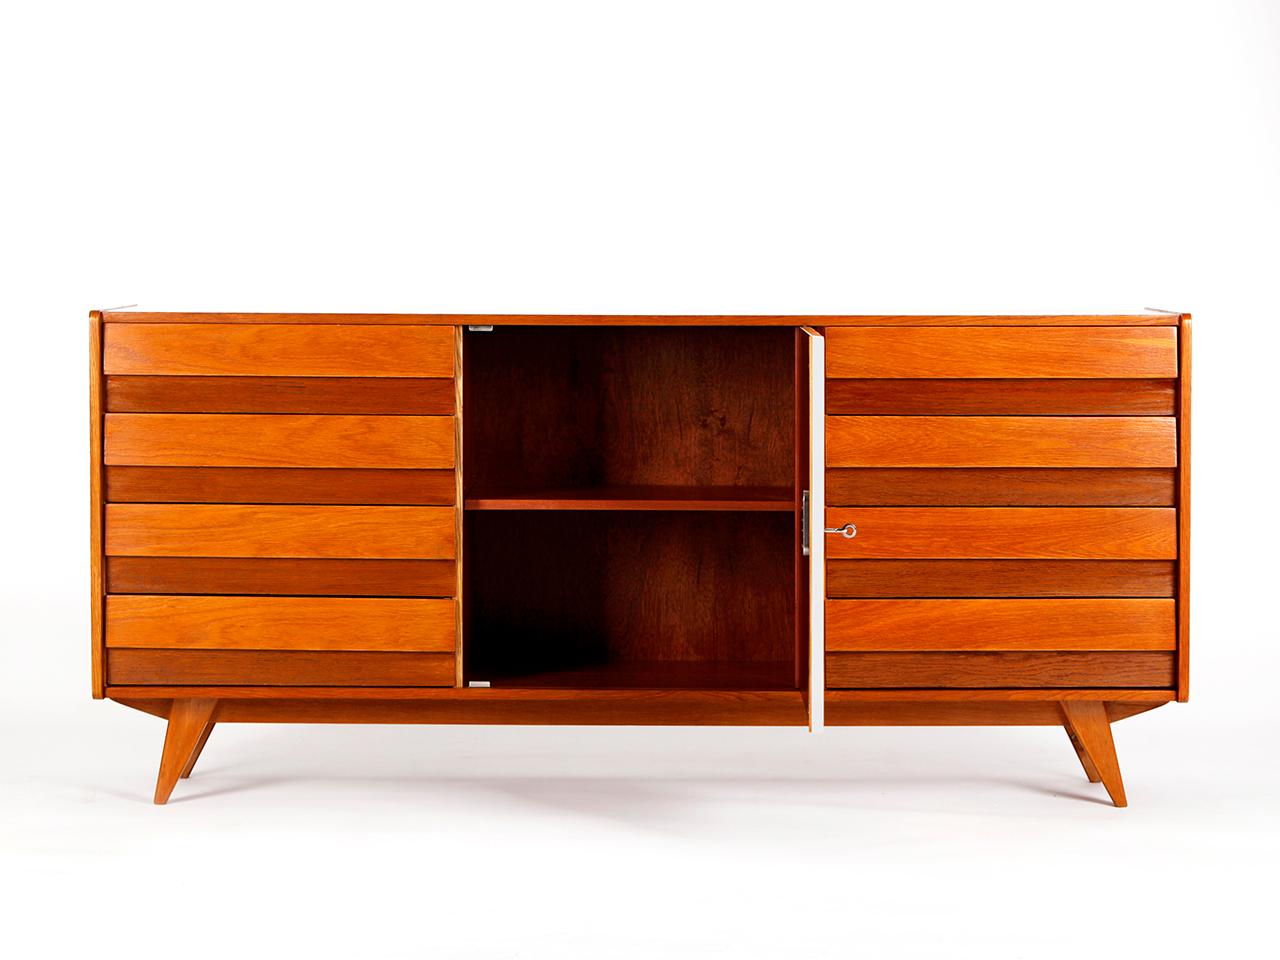 This model U-460 sideboard was designed by Jiri Jiroutek for Interior Praha in former Czechoslovakia. With gray door and eight drawers. Produced in the 1960s. Completely restored and repainted. Excellent condition. Delivery time 3-4 weeks.